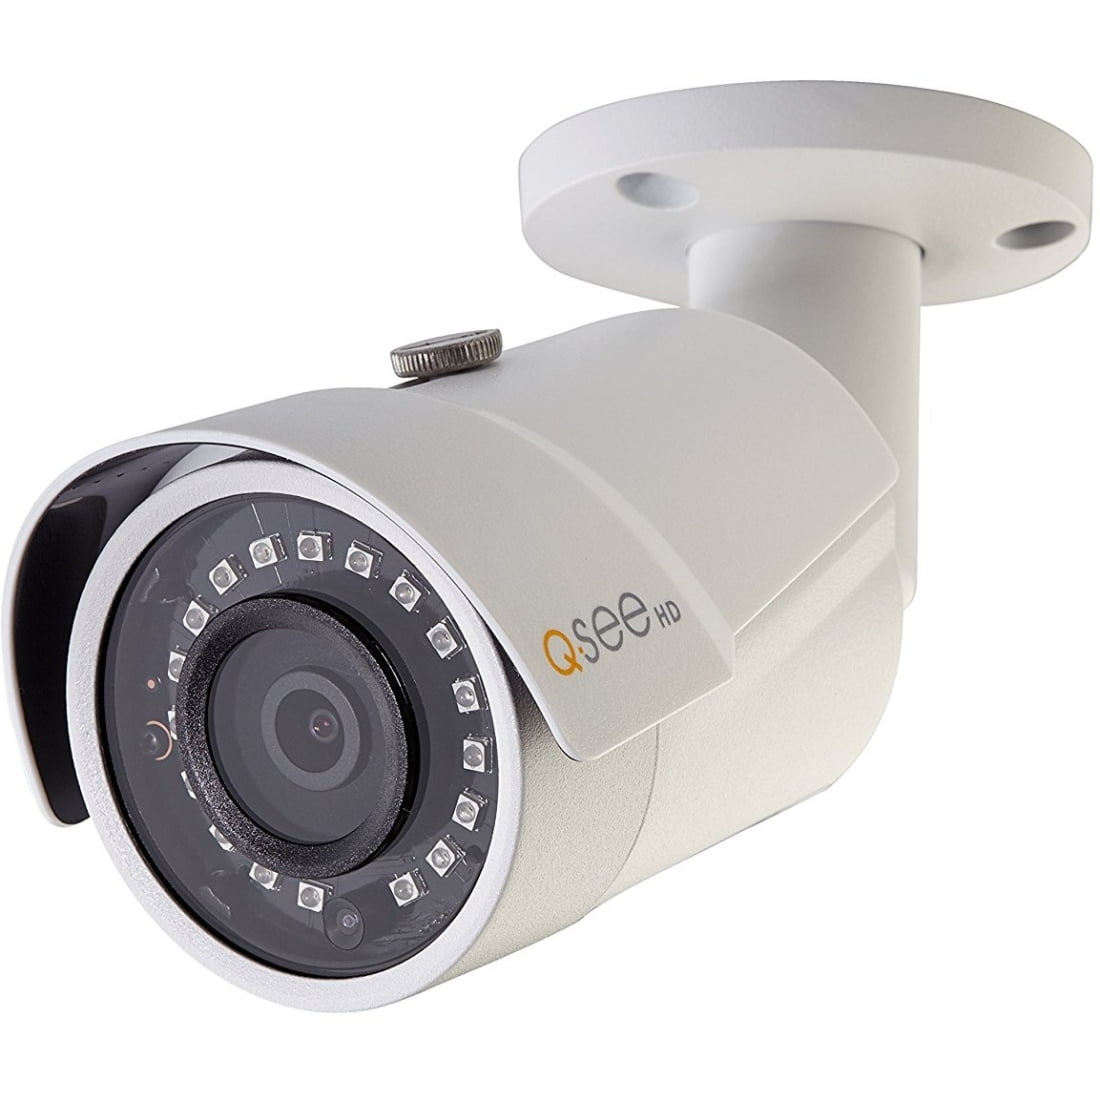 Q-See QCN8004B 1080p High Definition Weatherproof IP Bullet Camera with 100-Feet Night Vision White